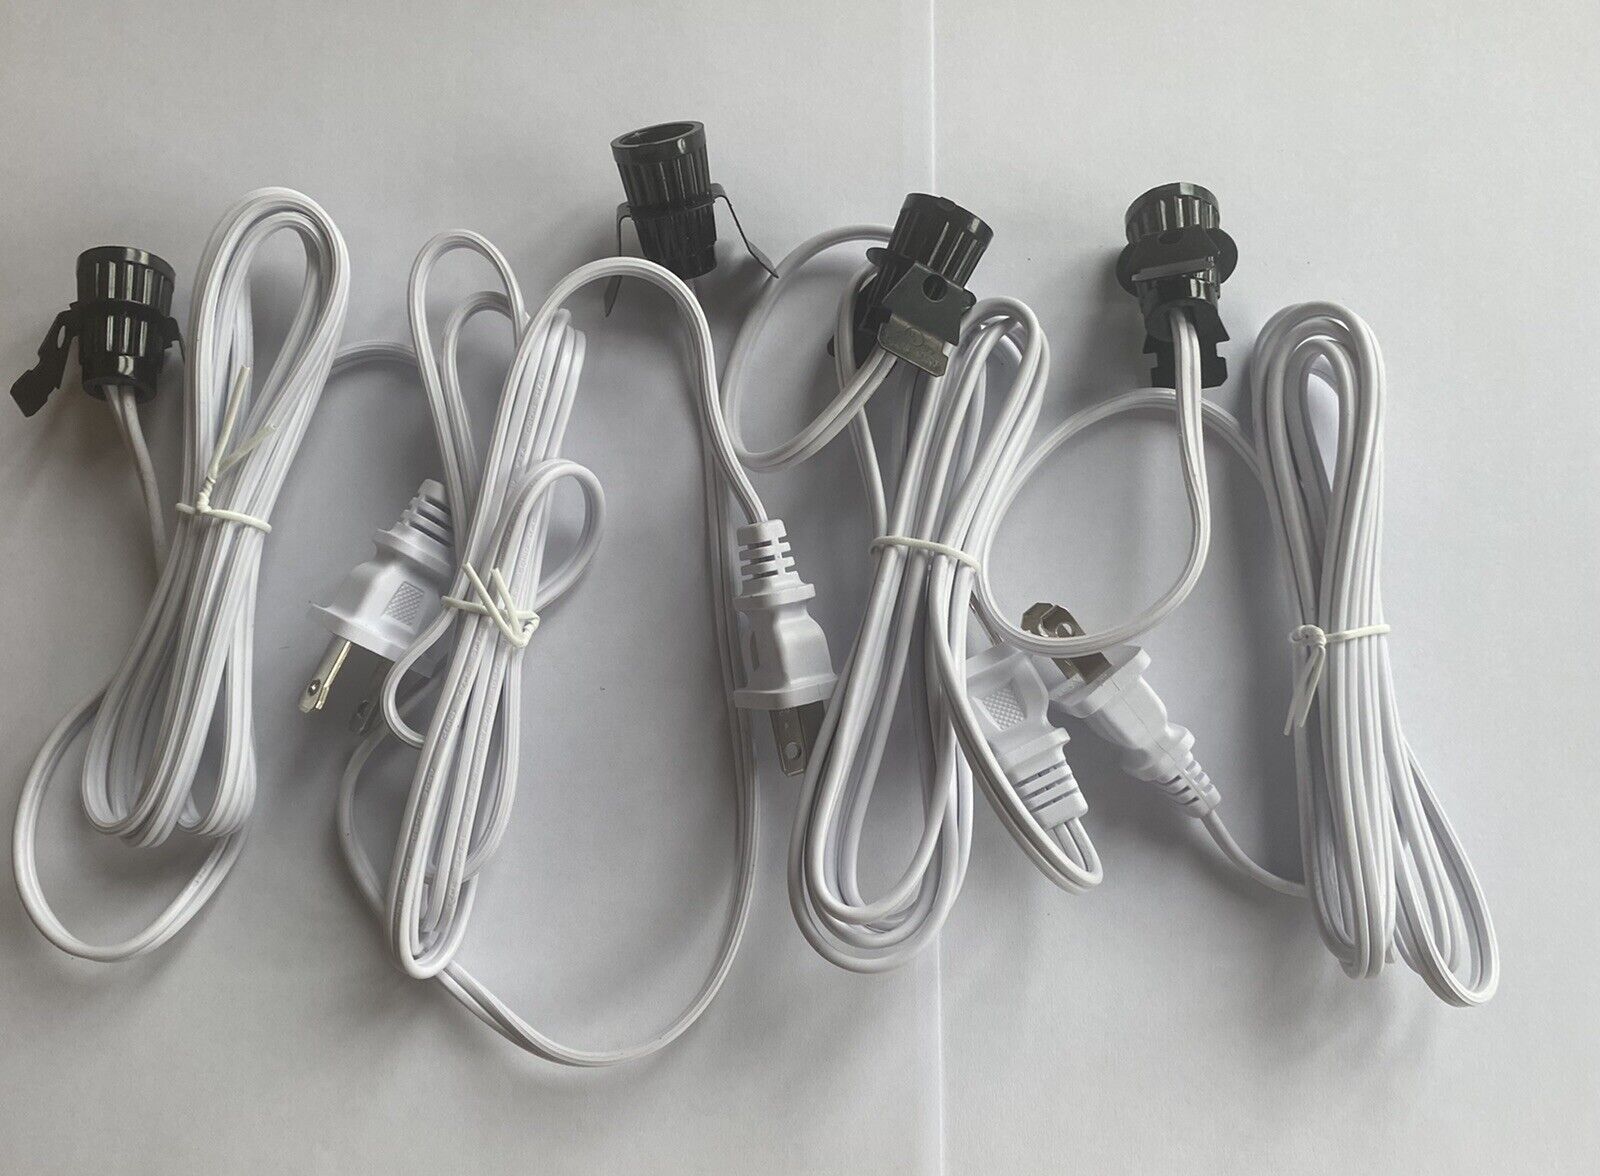 4 NEW Replacement Blow Mold C7 Light Cord 6 Ft Halloween Christmas Ships From NH